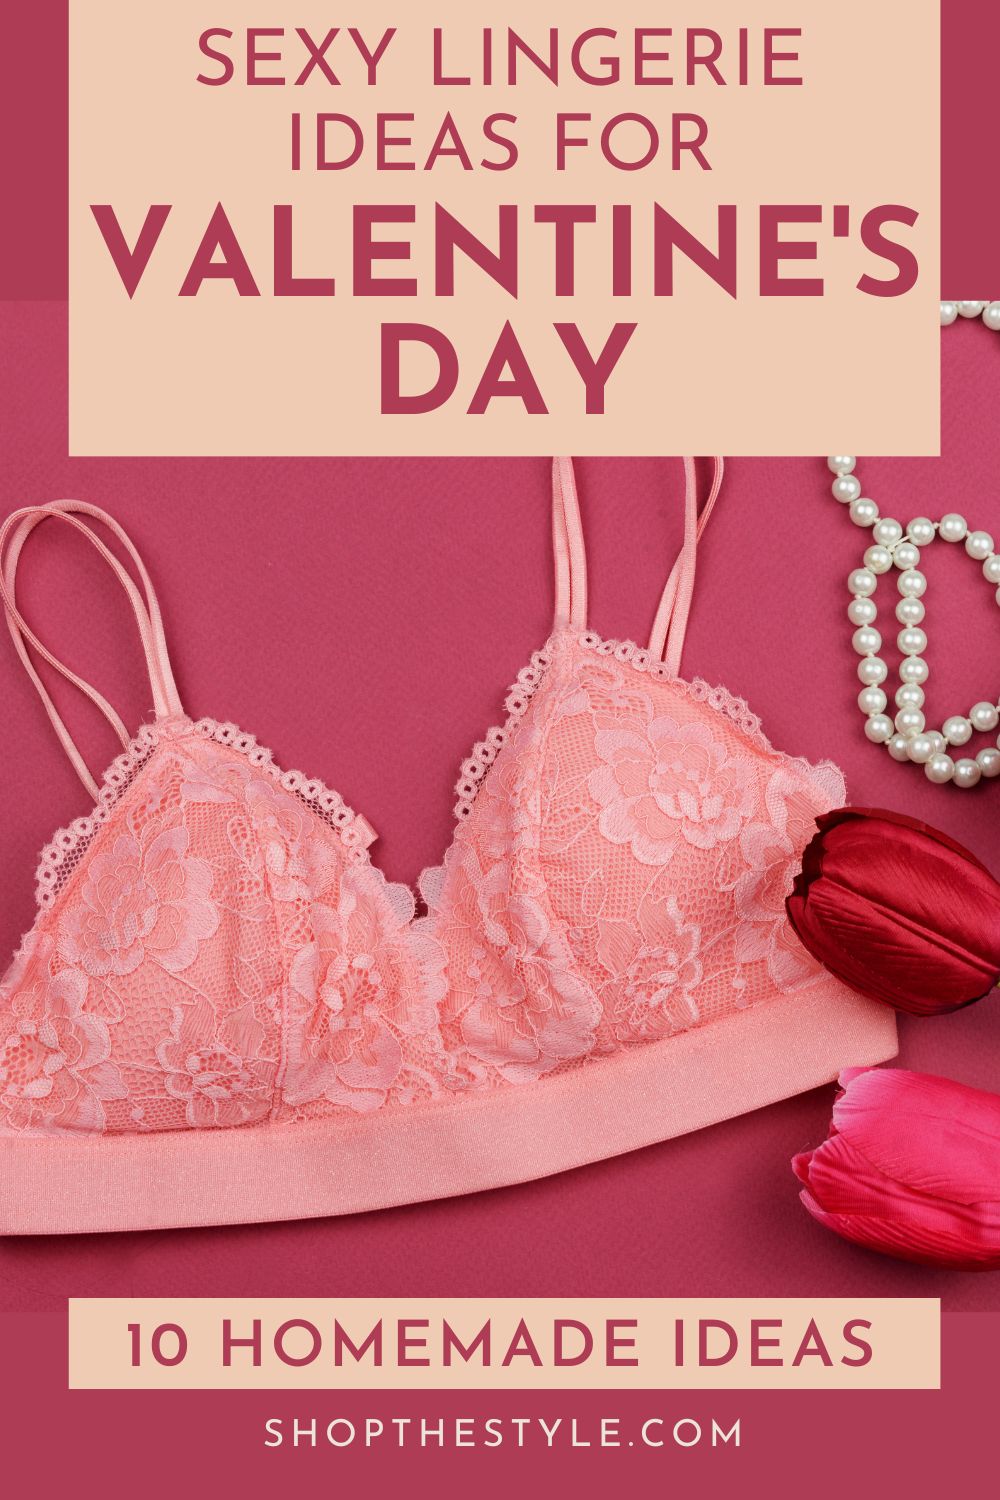 Homemade Sexy Lingerie Ideas For Valentine’s Day Or Any Day